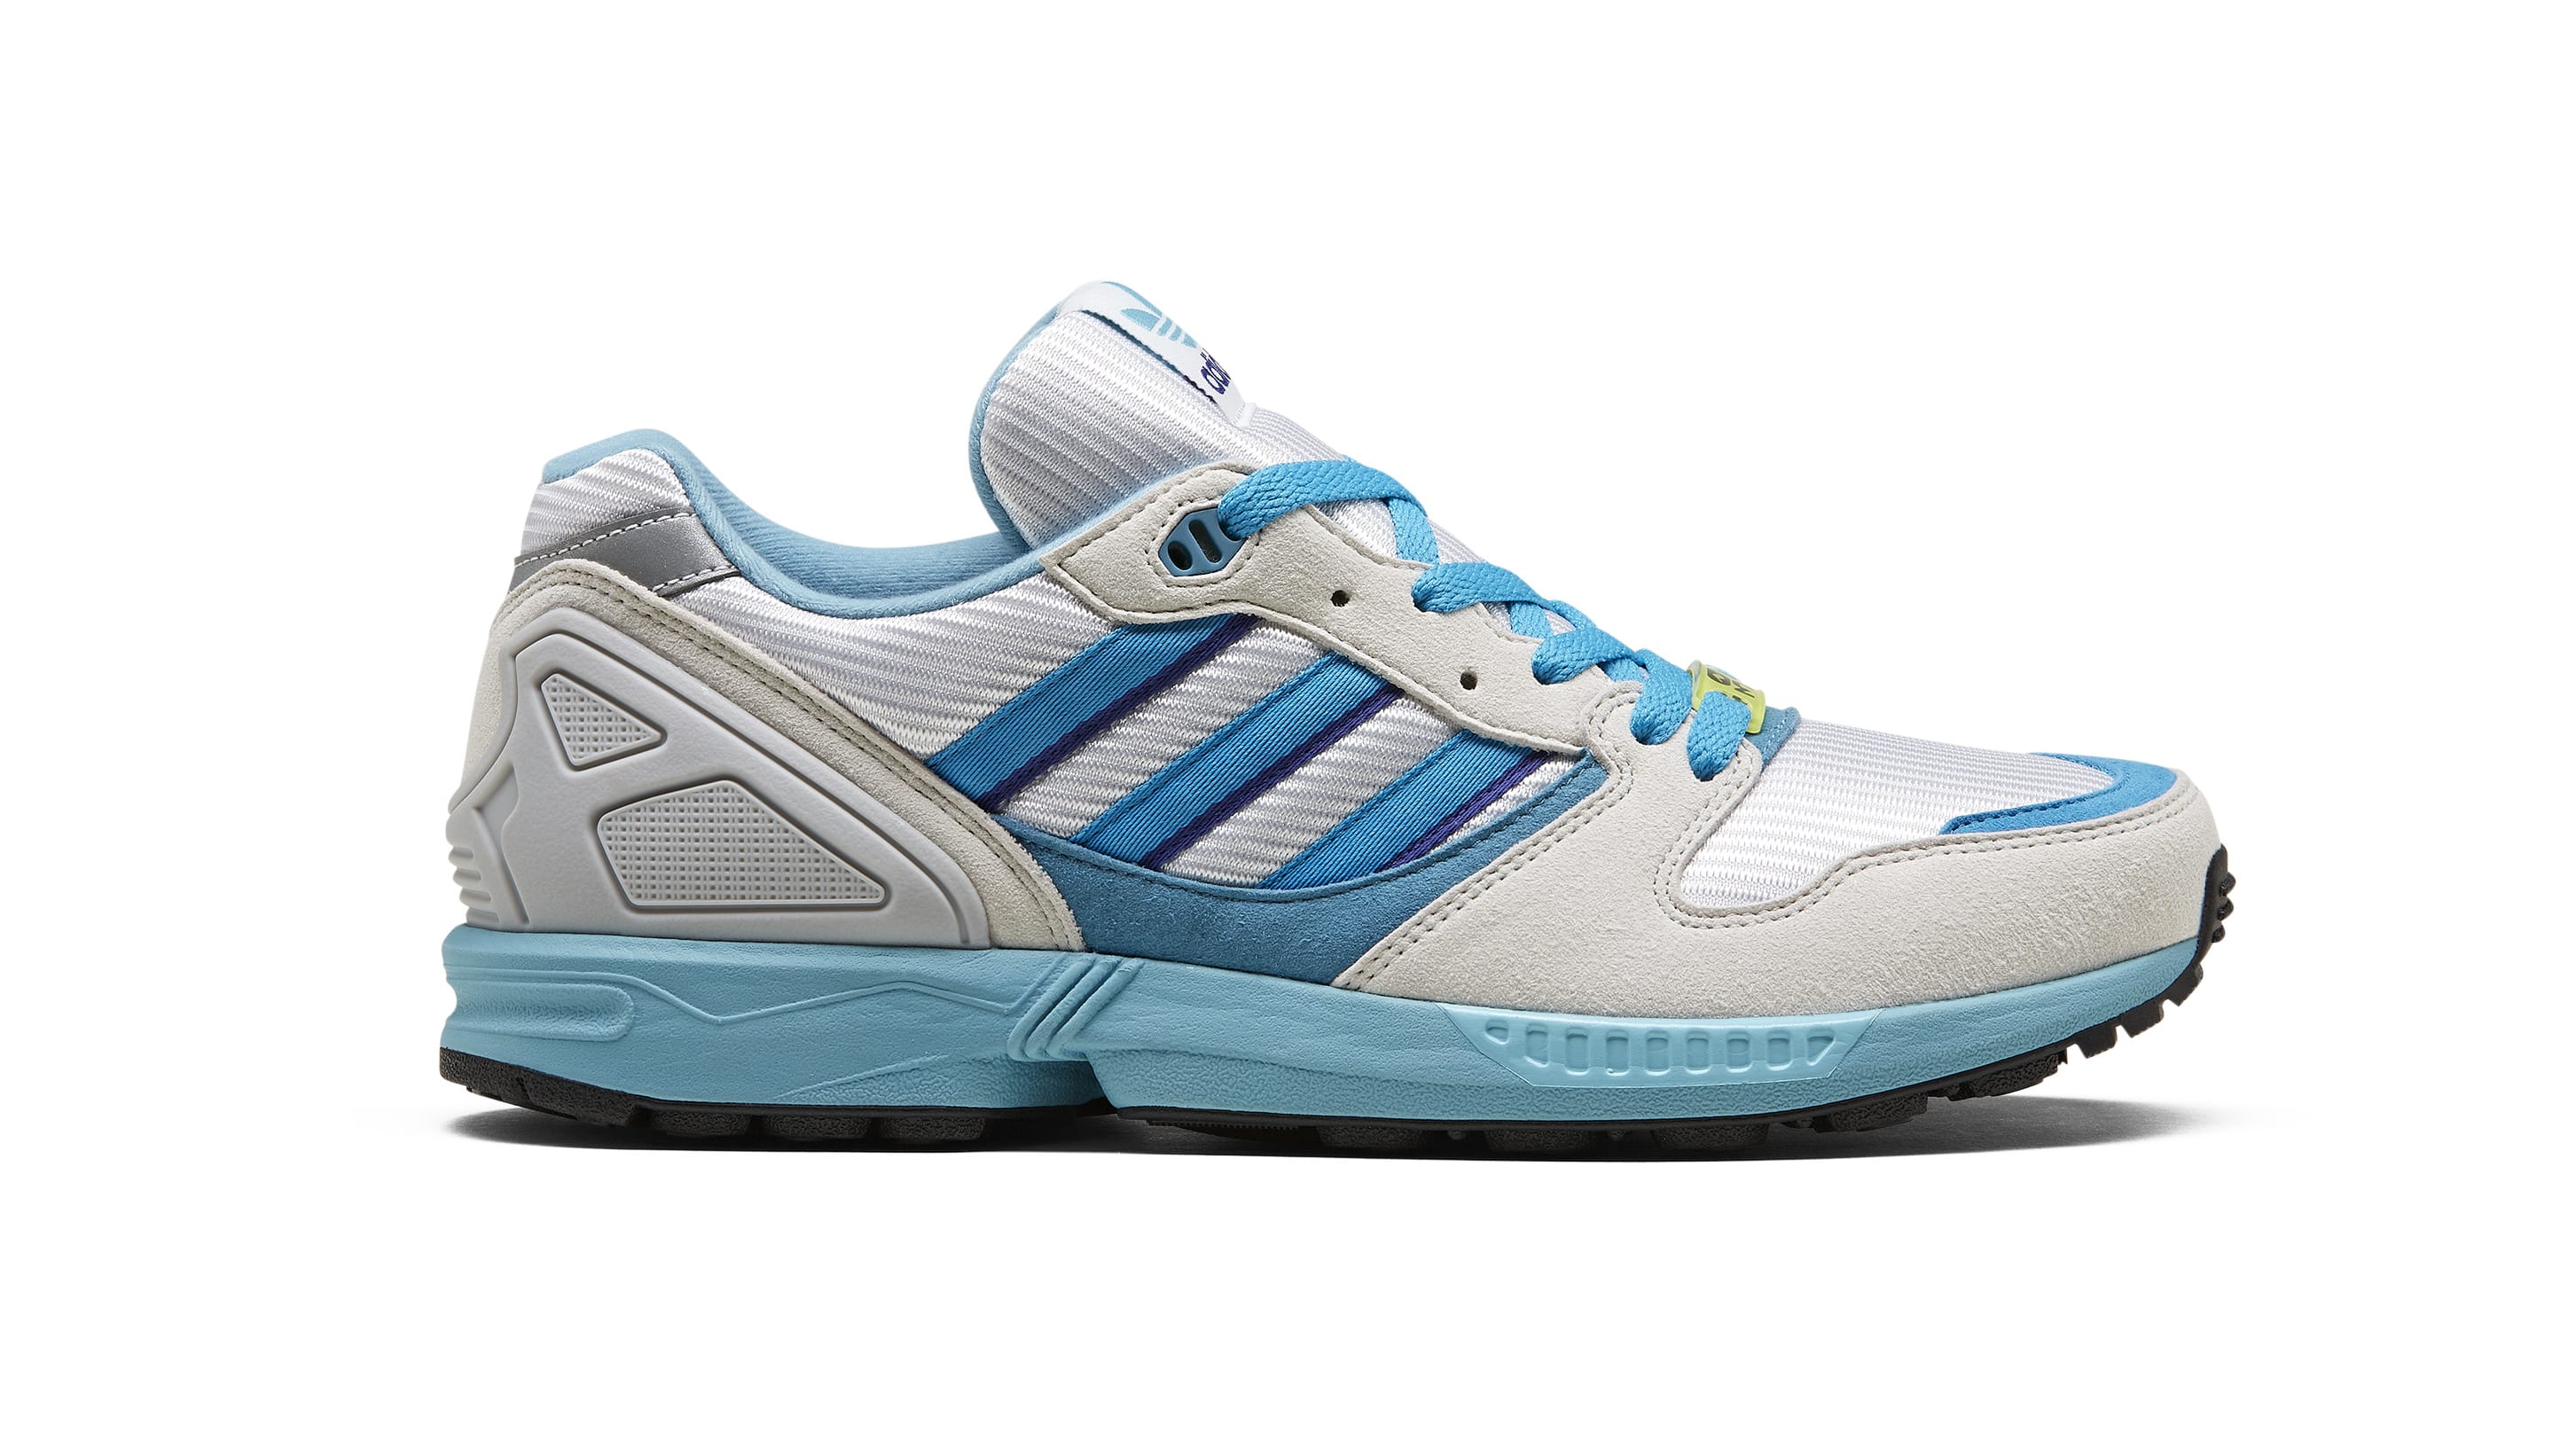 Adidas Celebrates Its ZX Series With the '30 Years of Torsion 